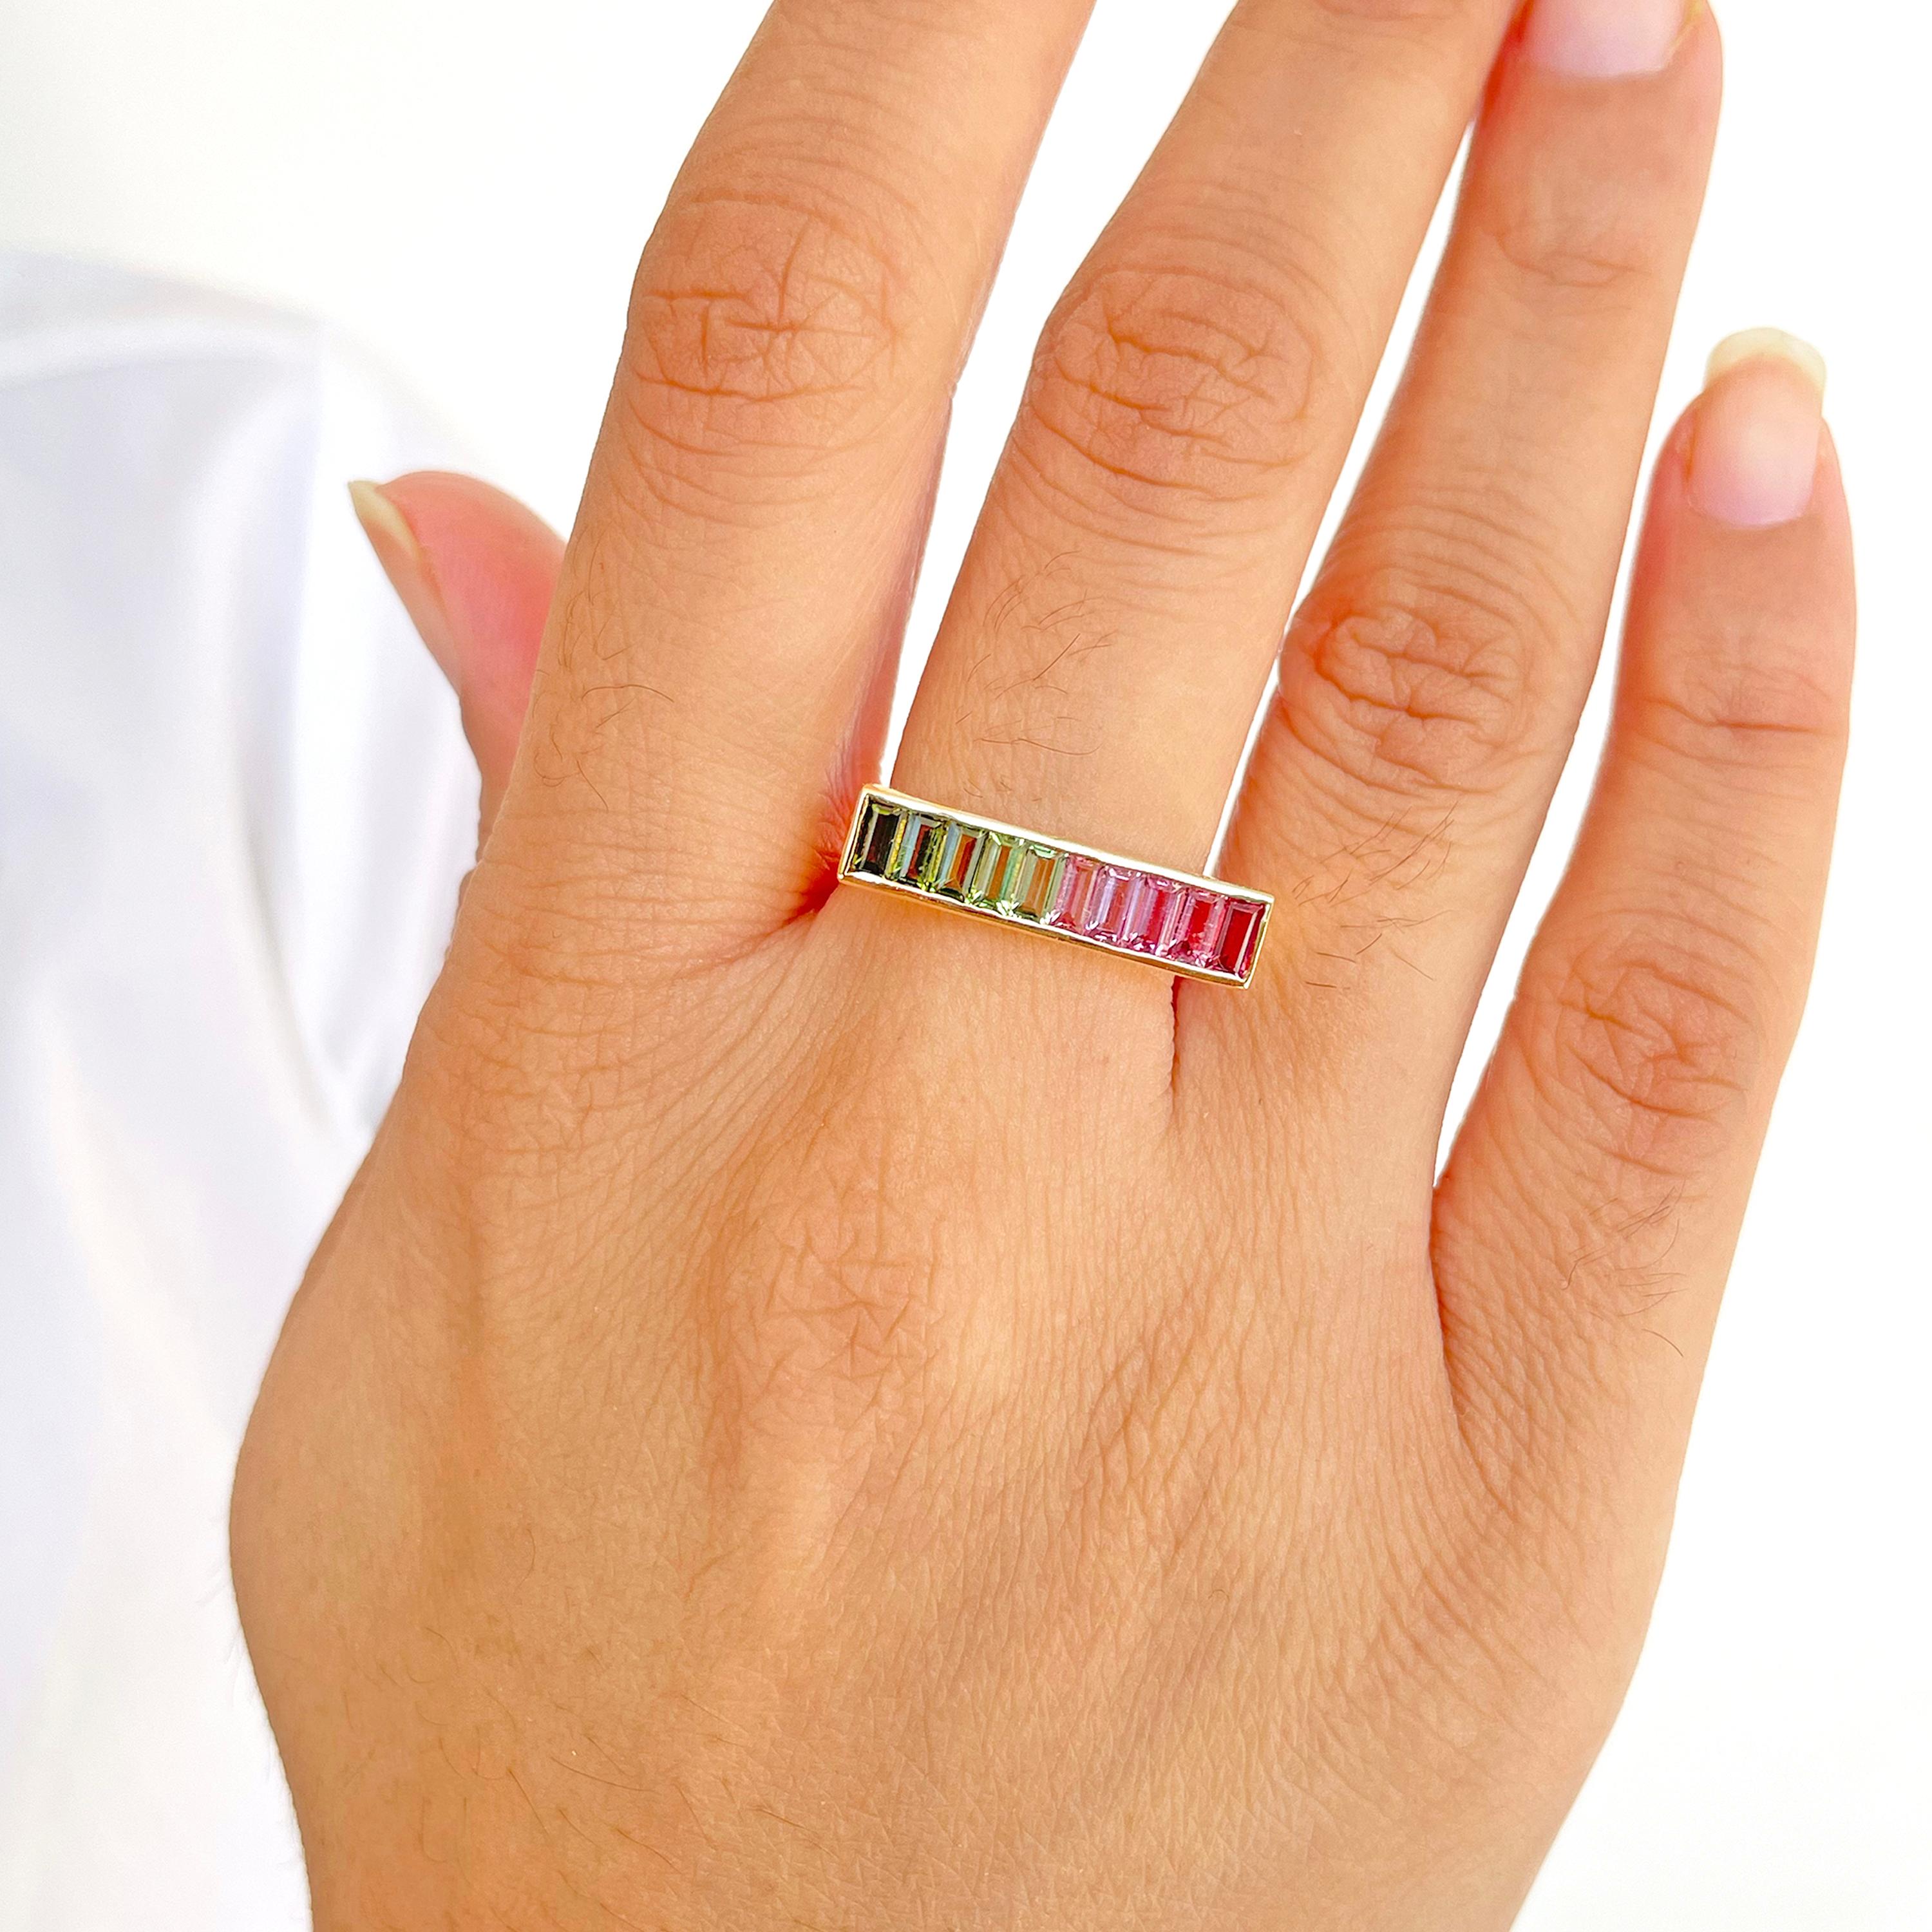 18 karat yellow gold green pink watermelon bi-color tourmaline linear bar band ring

Add something special to your jewellery box with the unique watermelon tourmaline bar ring. Set in 18 karat gold, this classic linear design features channel set in